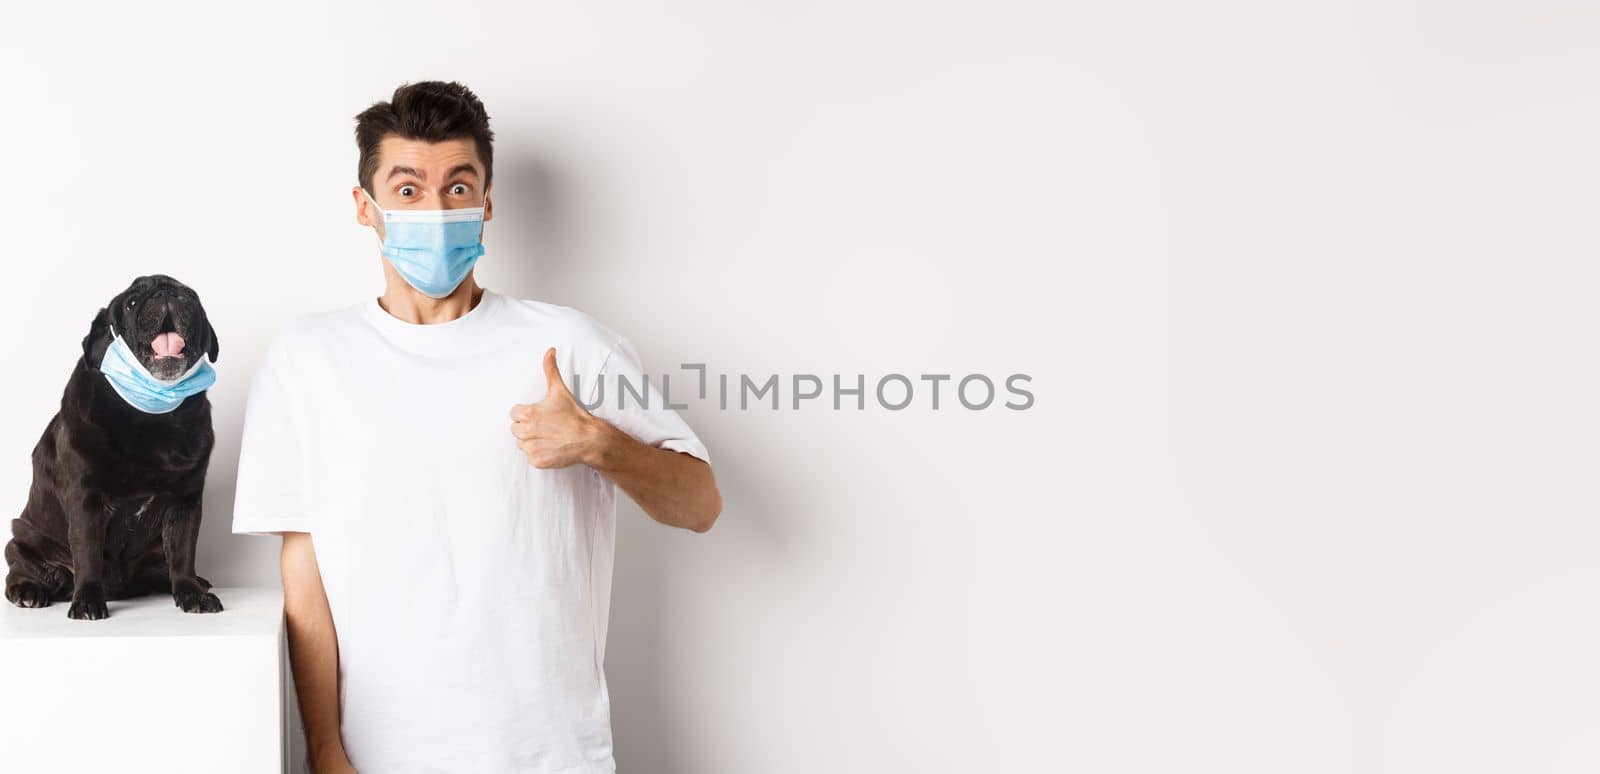 Covid-19, animals and quarantine concept. Image of funny young man and small dog in medical masks, owner showing thumb up in approval, praise something, white background by Benzoix